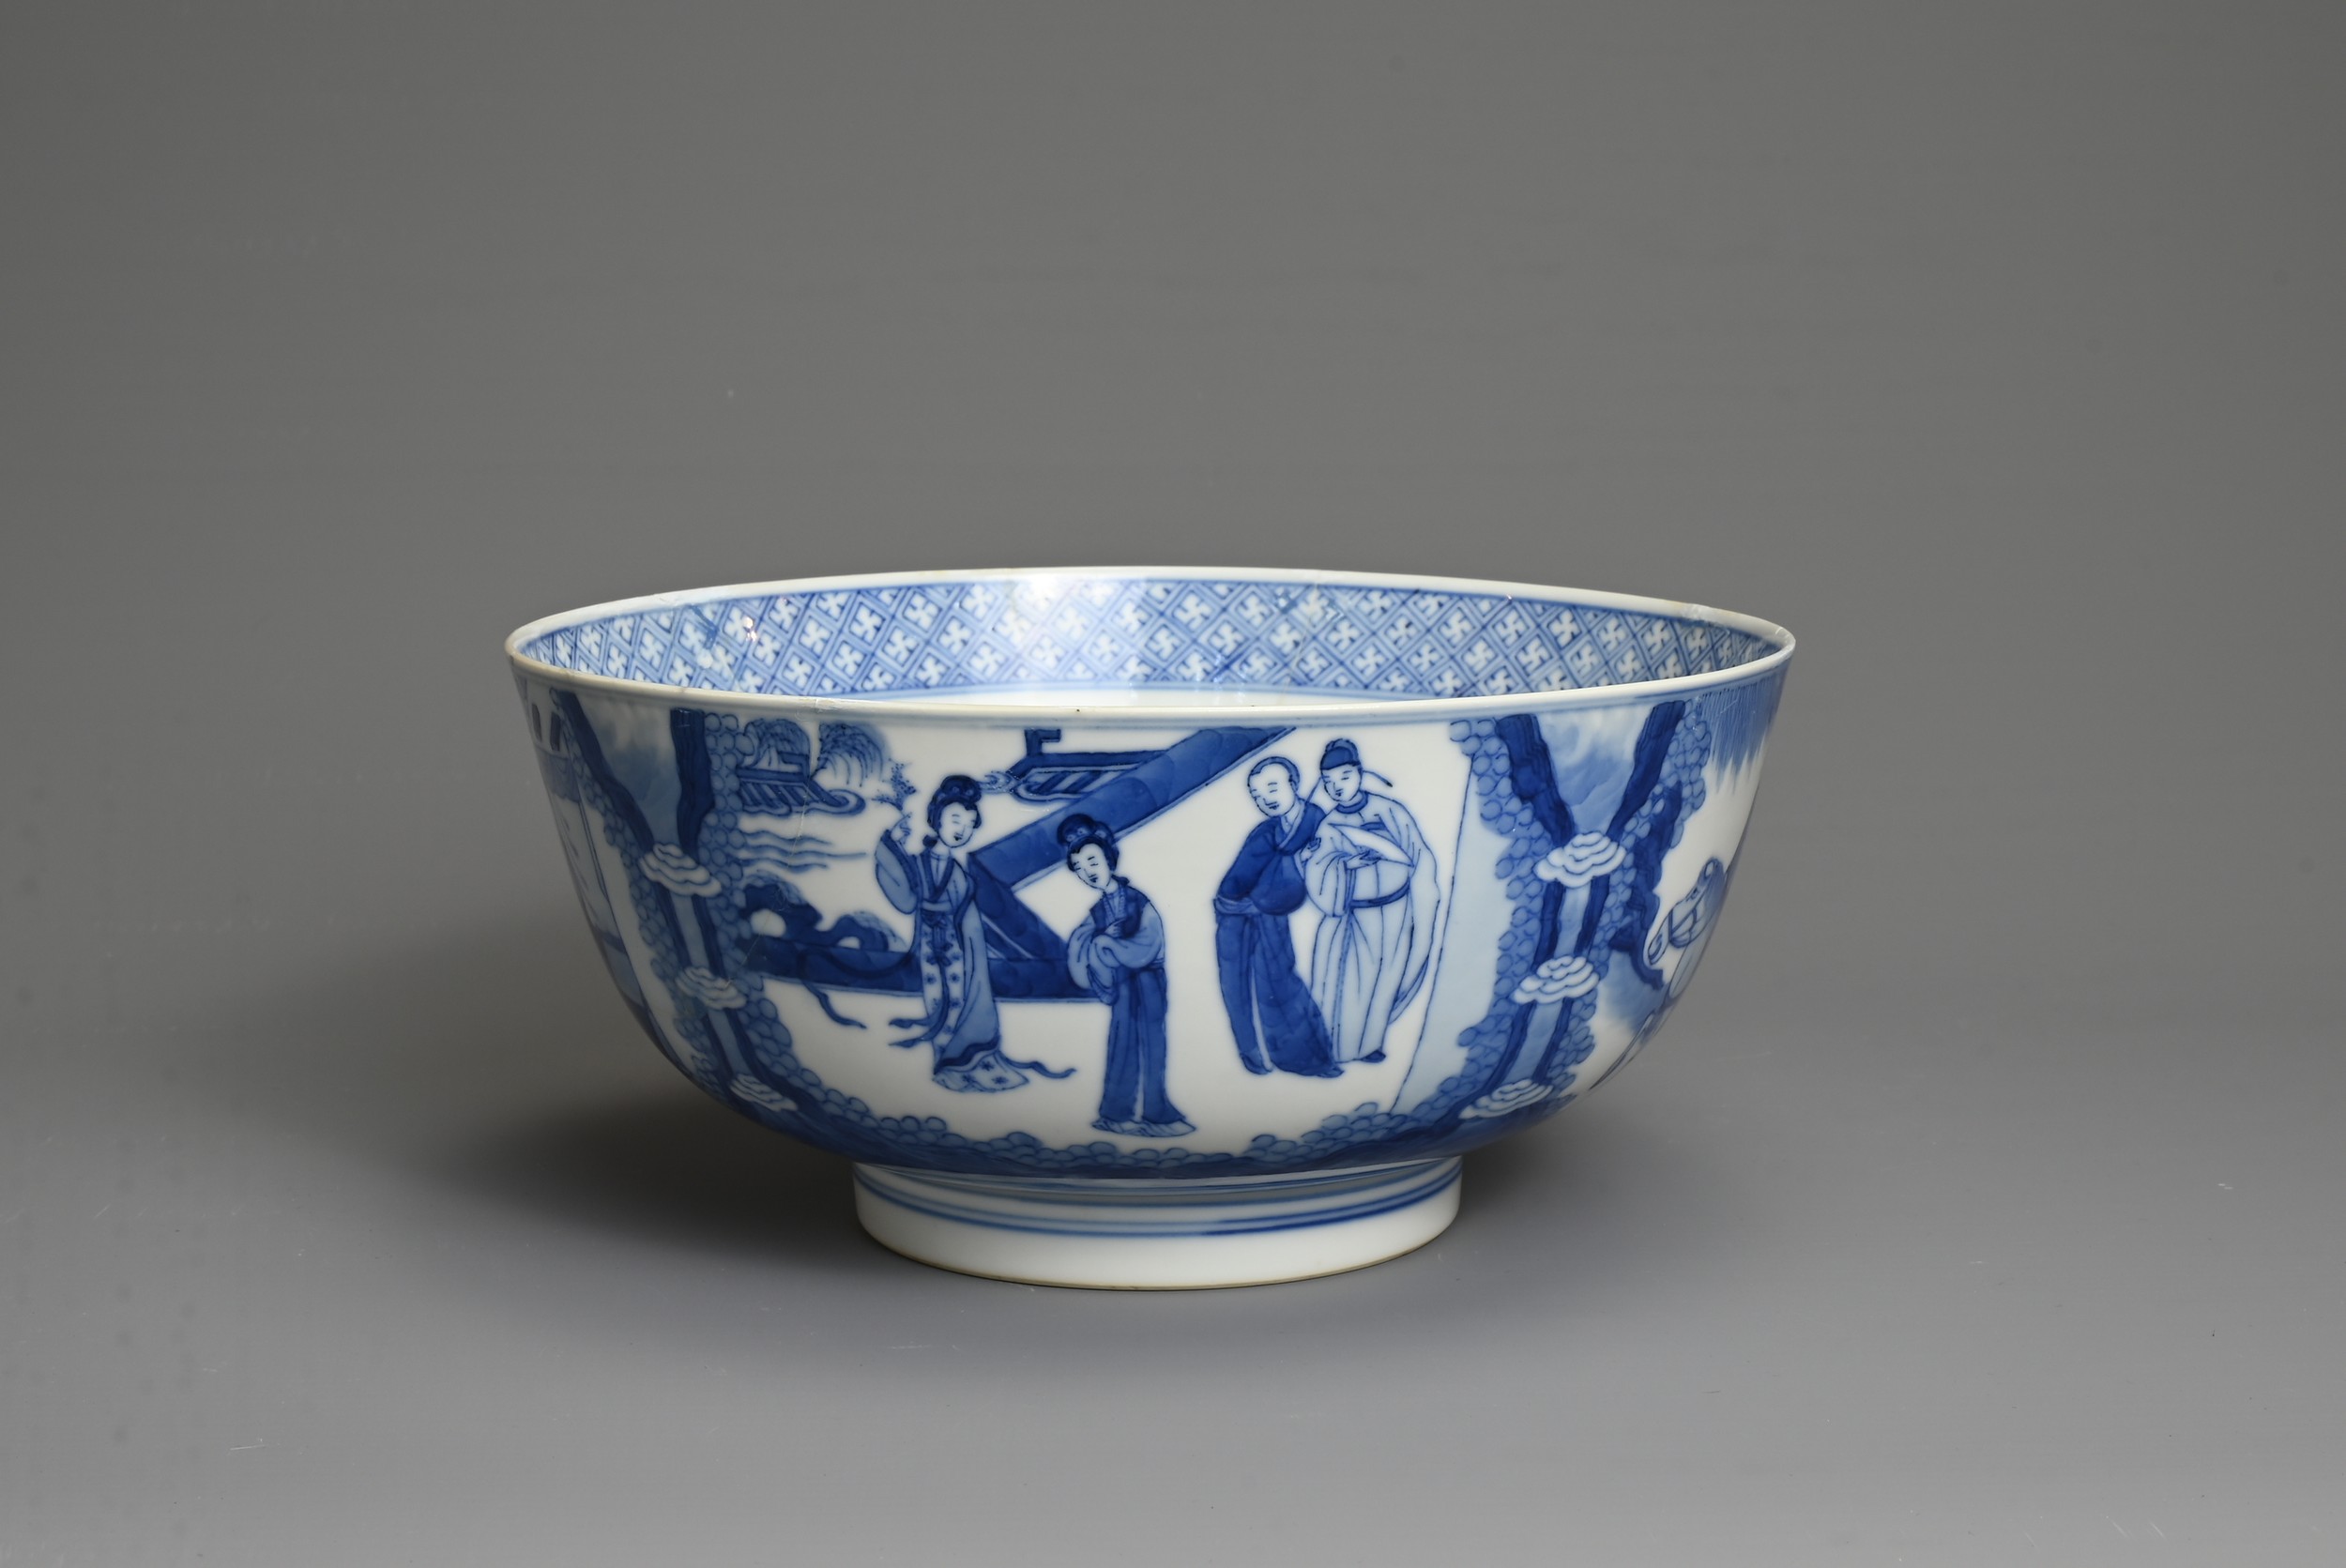 A CHINESE BLUE AND WHITE PORCELAIN BOWL, KANGXI PERIOD. Decorated with scene from the 'Romance of - Image 4 of 9